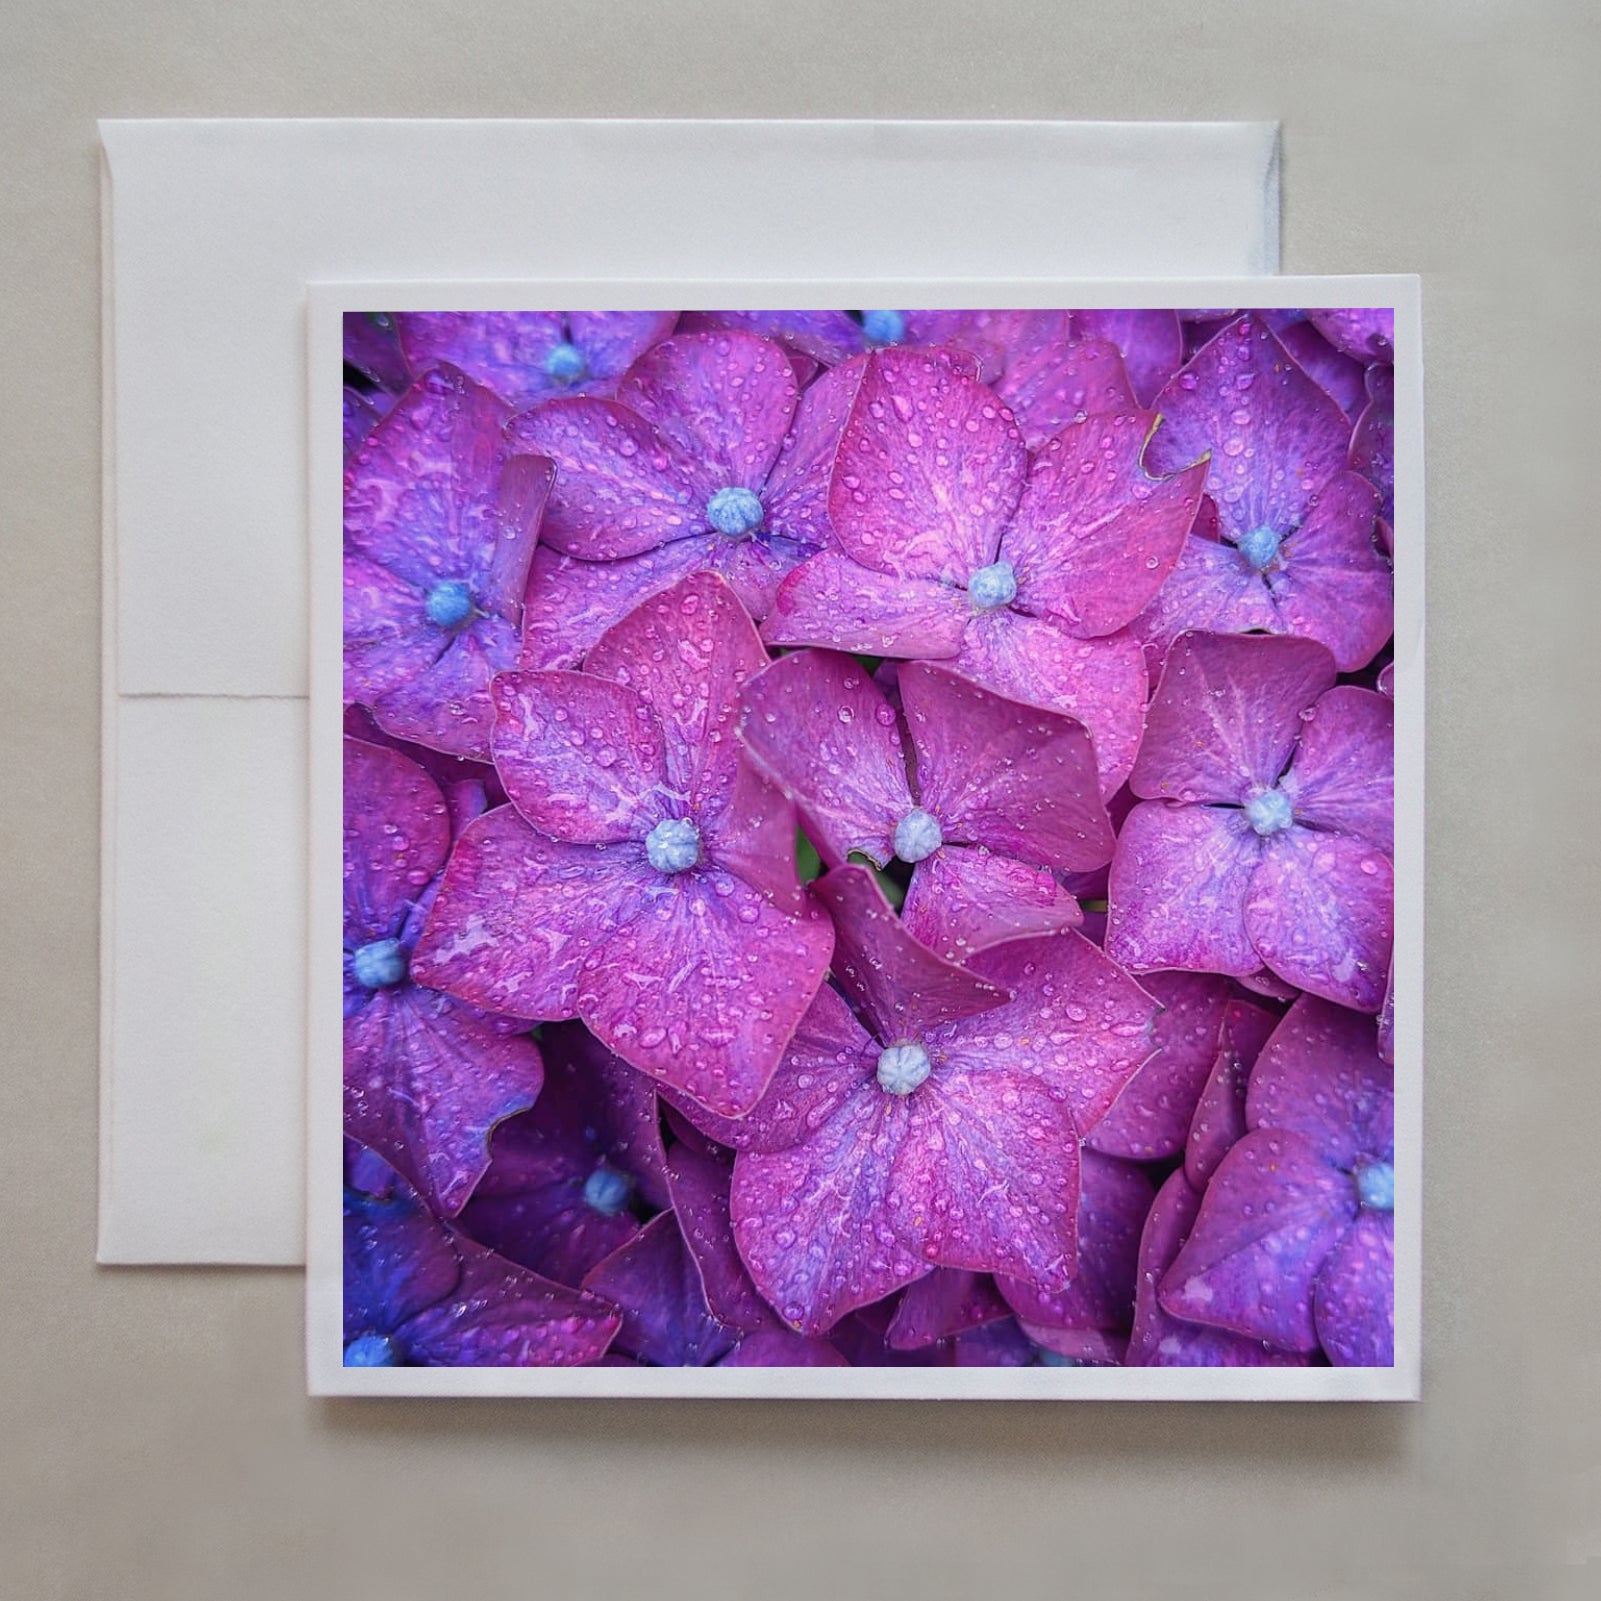 A vibrant photograph of flush, fuchsia flowers covered in water droplets by photographer Jennifer Echols.